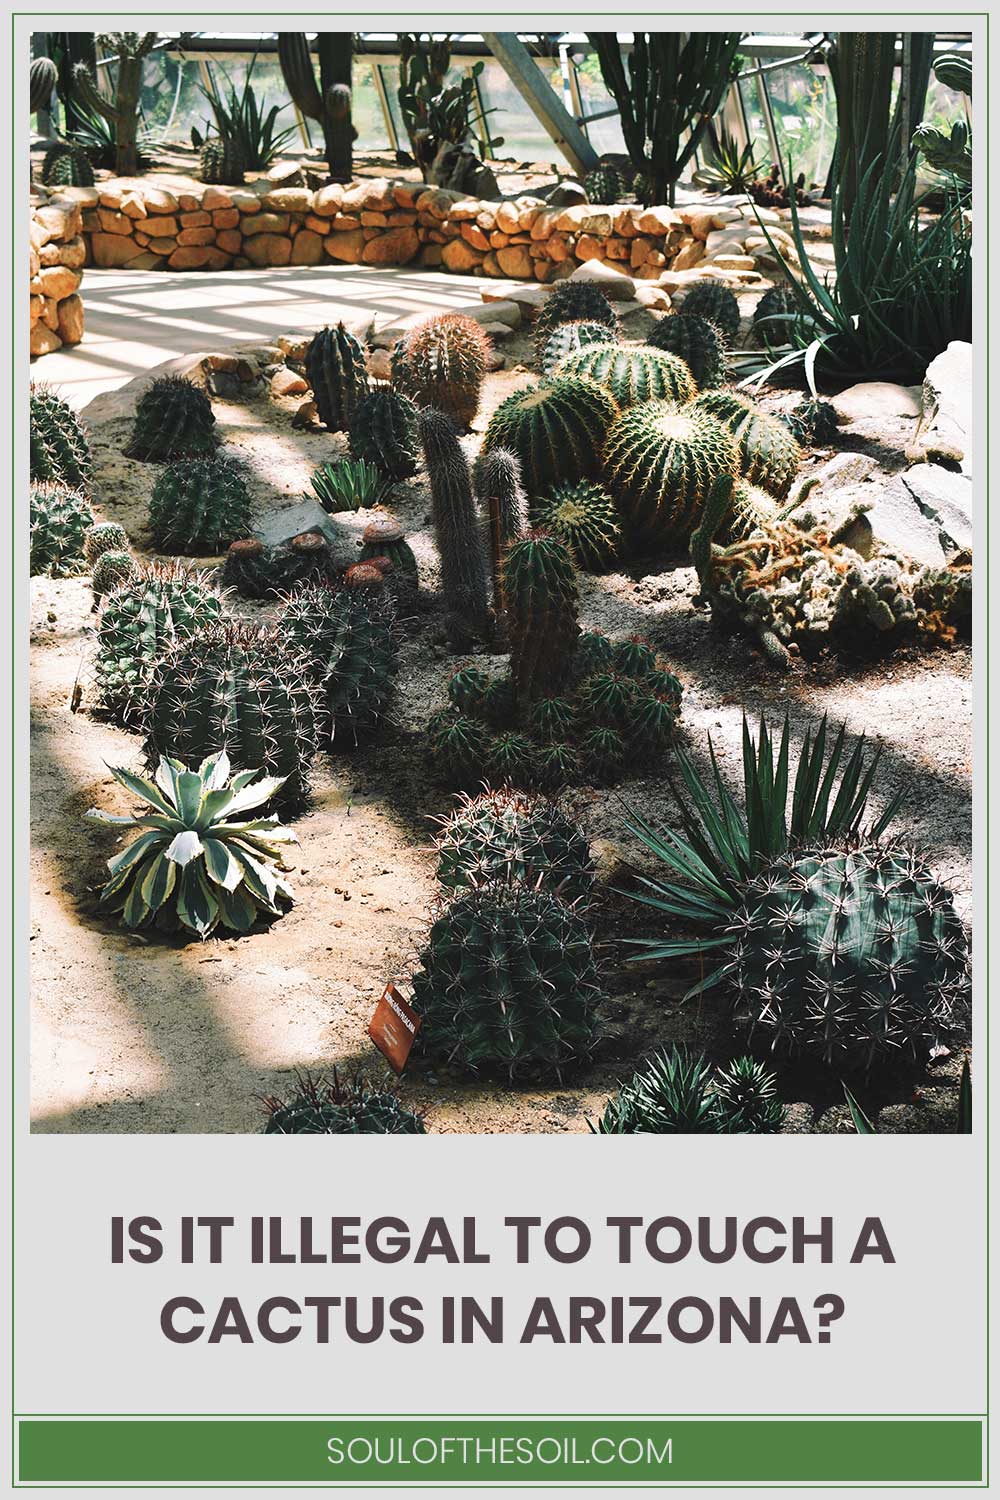 Some cactuses in different sizes - Is it illegal to touch them in Arizona?